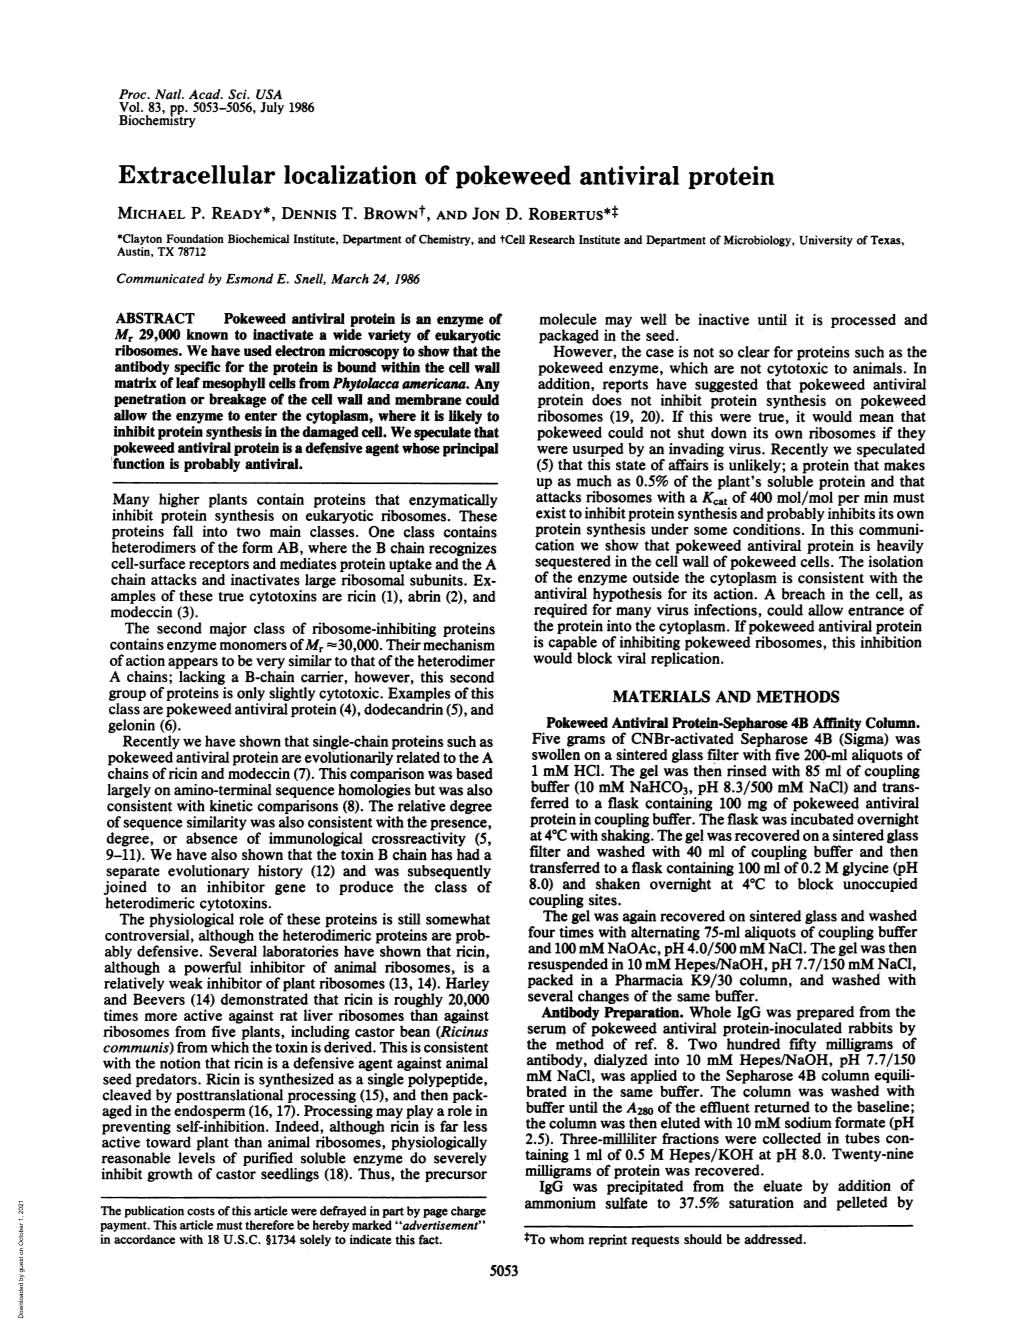 Extracellular Localization of Pokeweed Antiviral Protein MICHAEL P